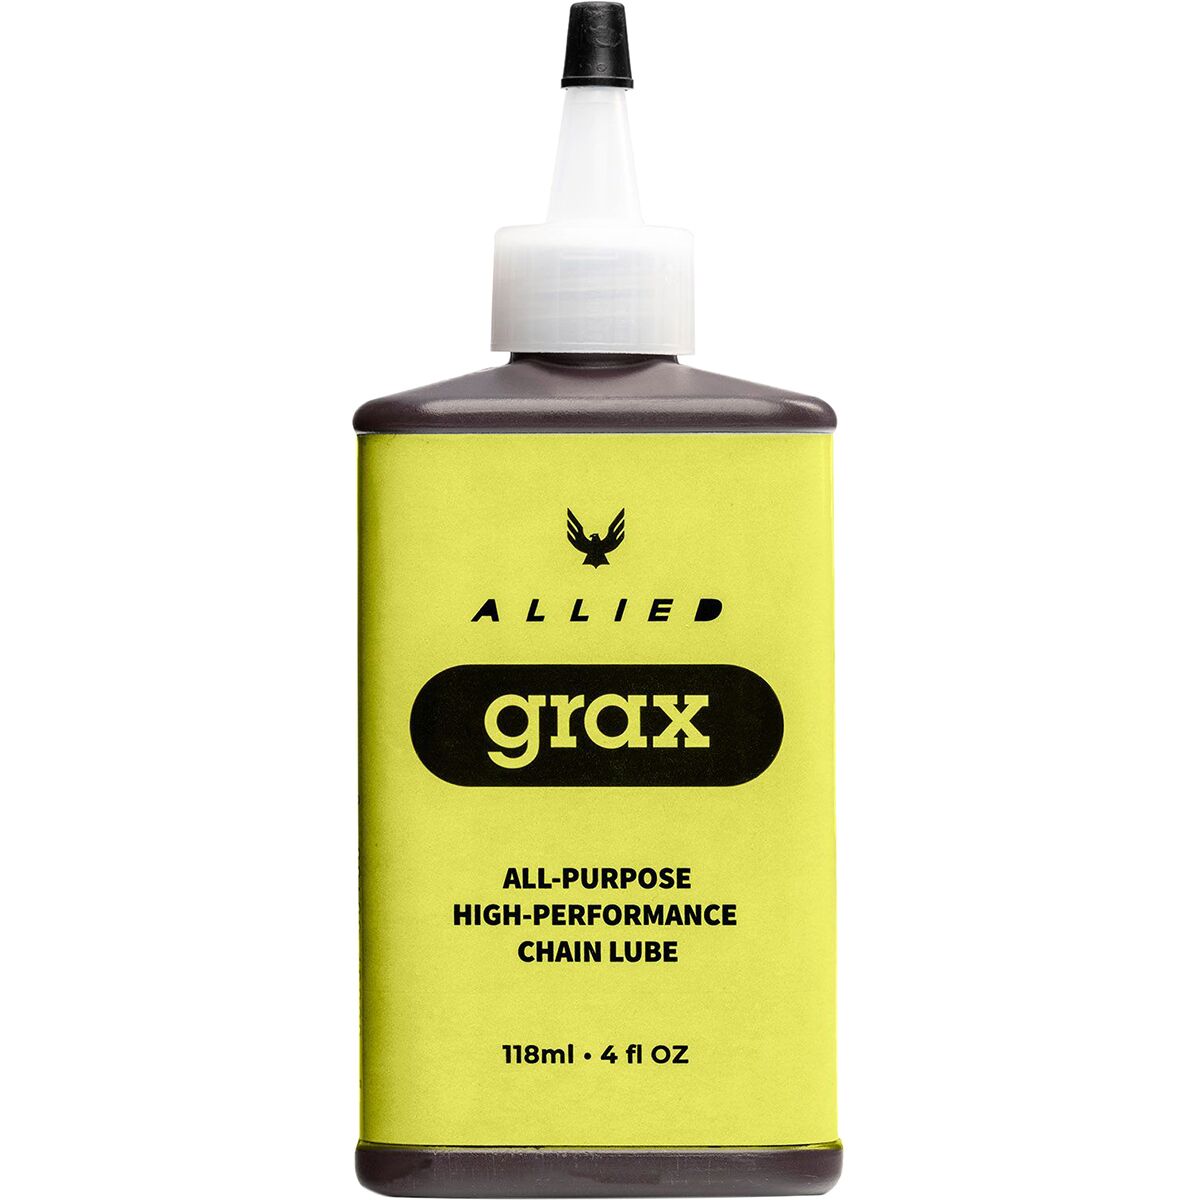 Allied Cycle Works GRAX Chain Lube